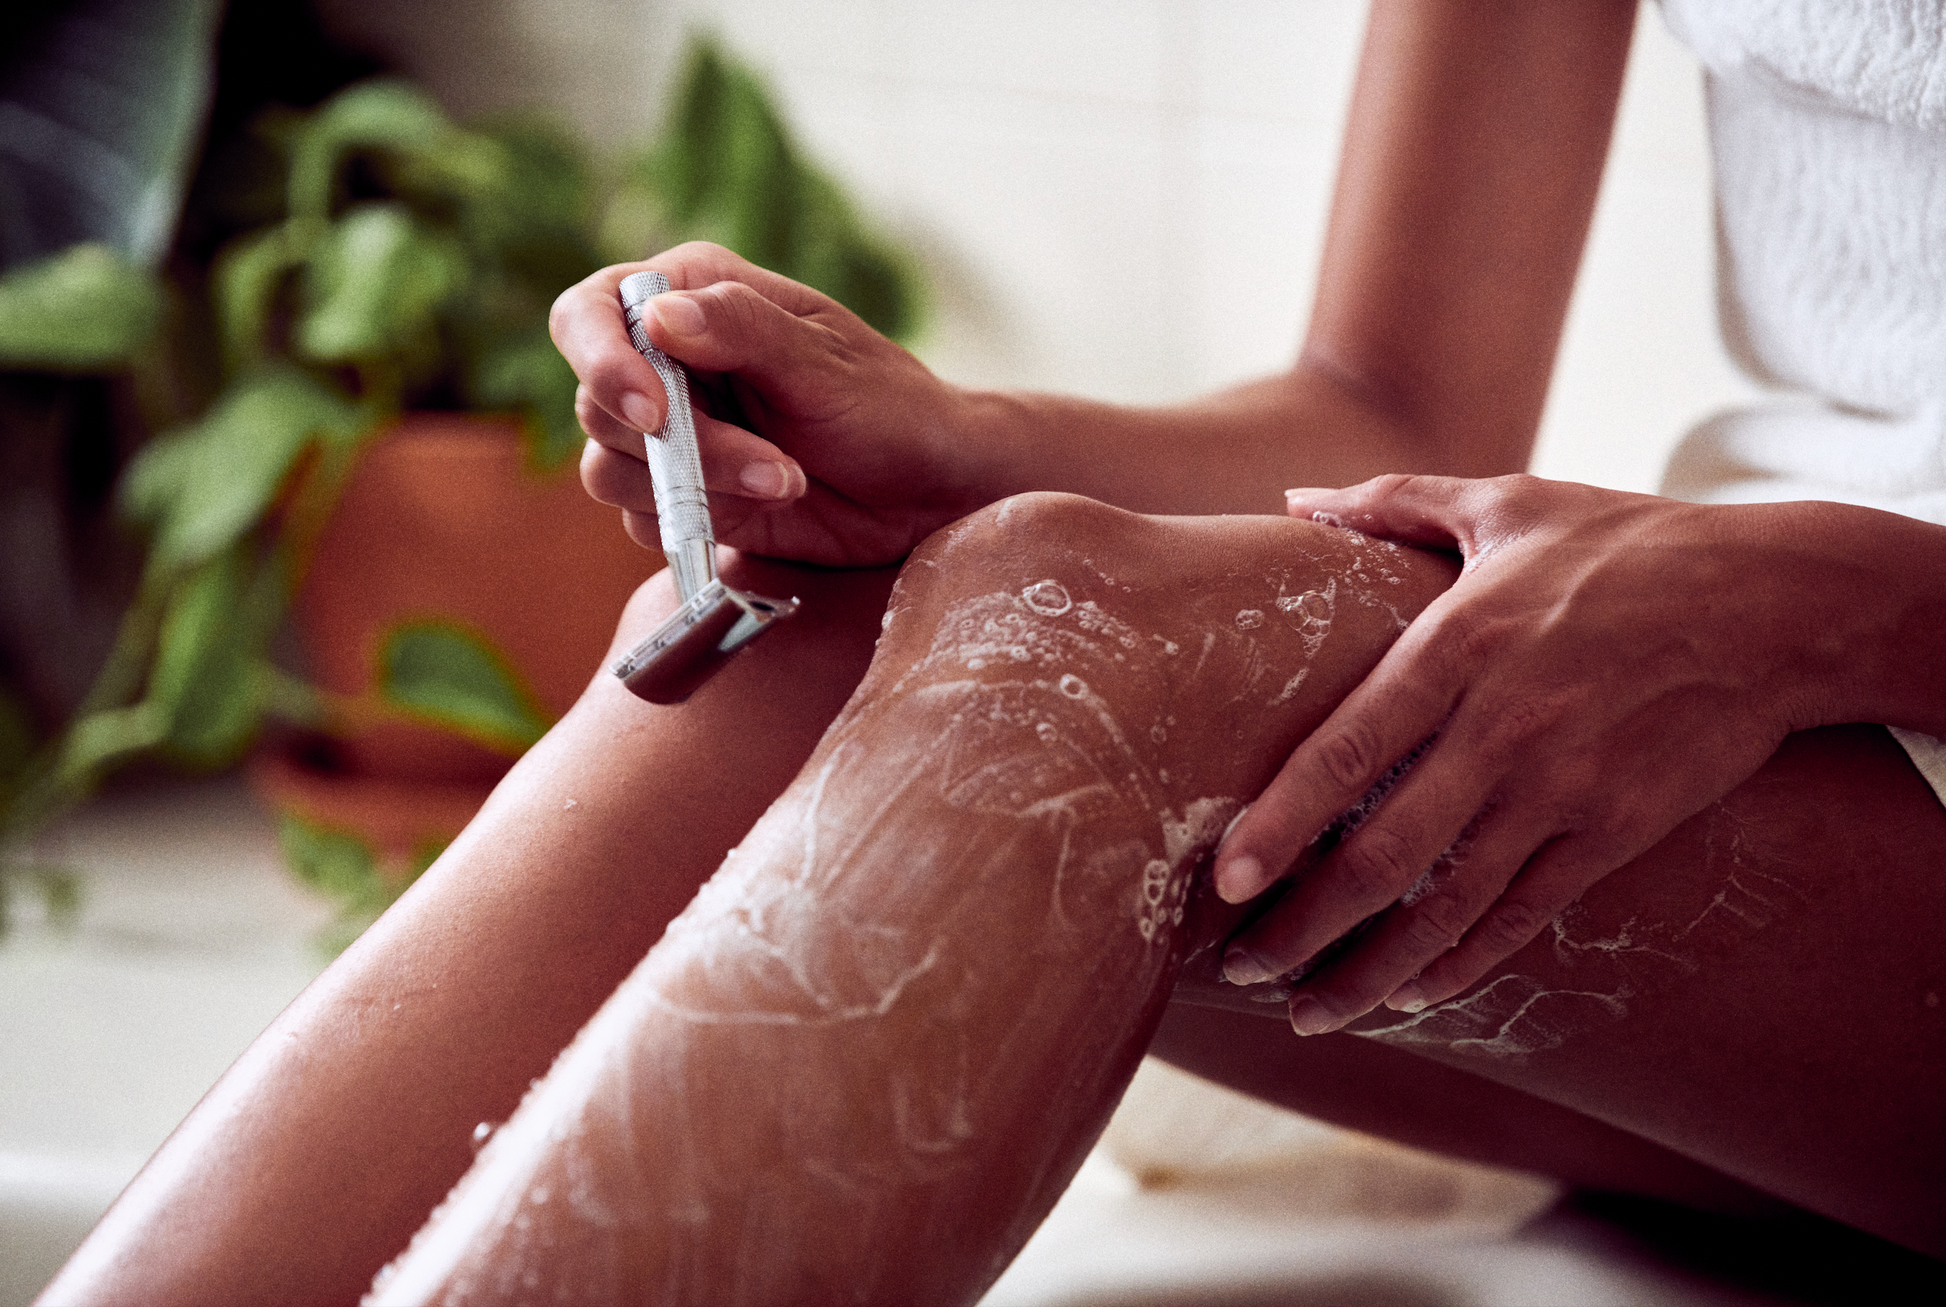 This image shows the Desesh premium quality solid body and face shave soap bar as an alternative to cans of shave foam or cream. This is a more eco friendly sustainable zero waste option and the shave bars come in biodegradable packaging. Shown here is a woman shaving her legs using a solid shave soap bar and a metal reusable safety razor in the bathroom